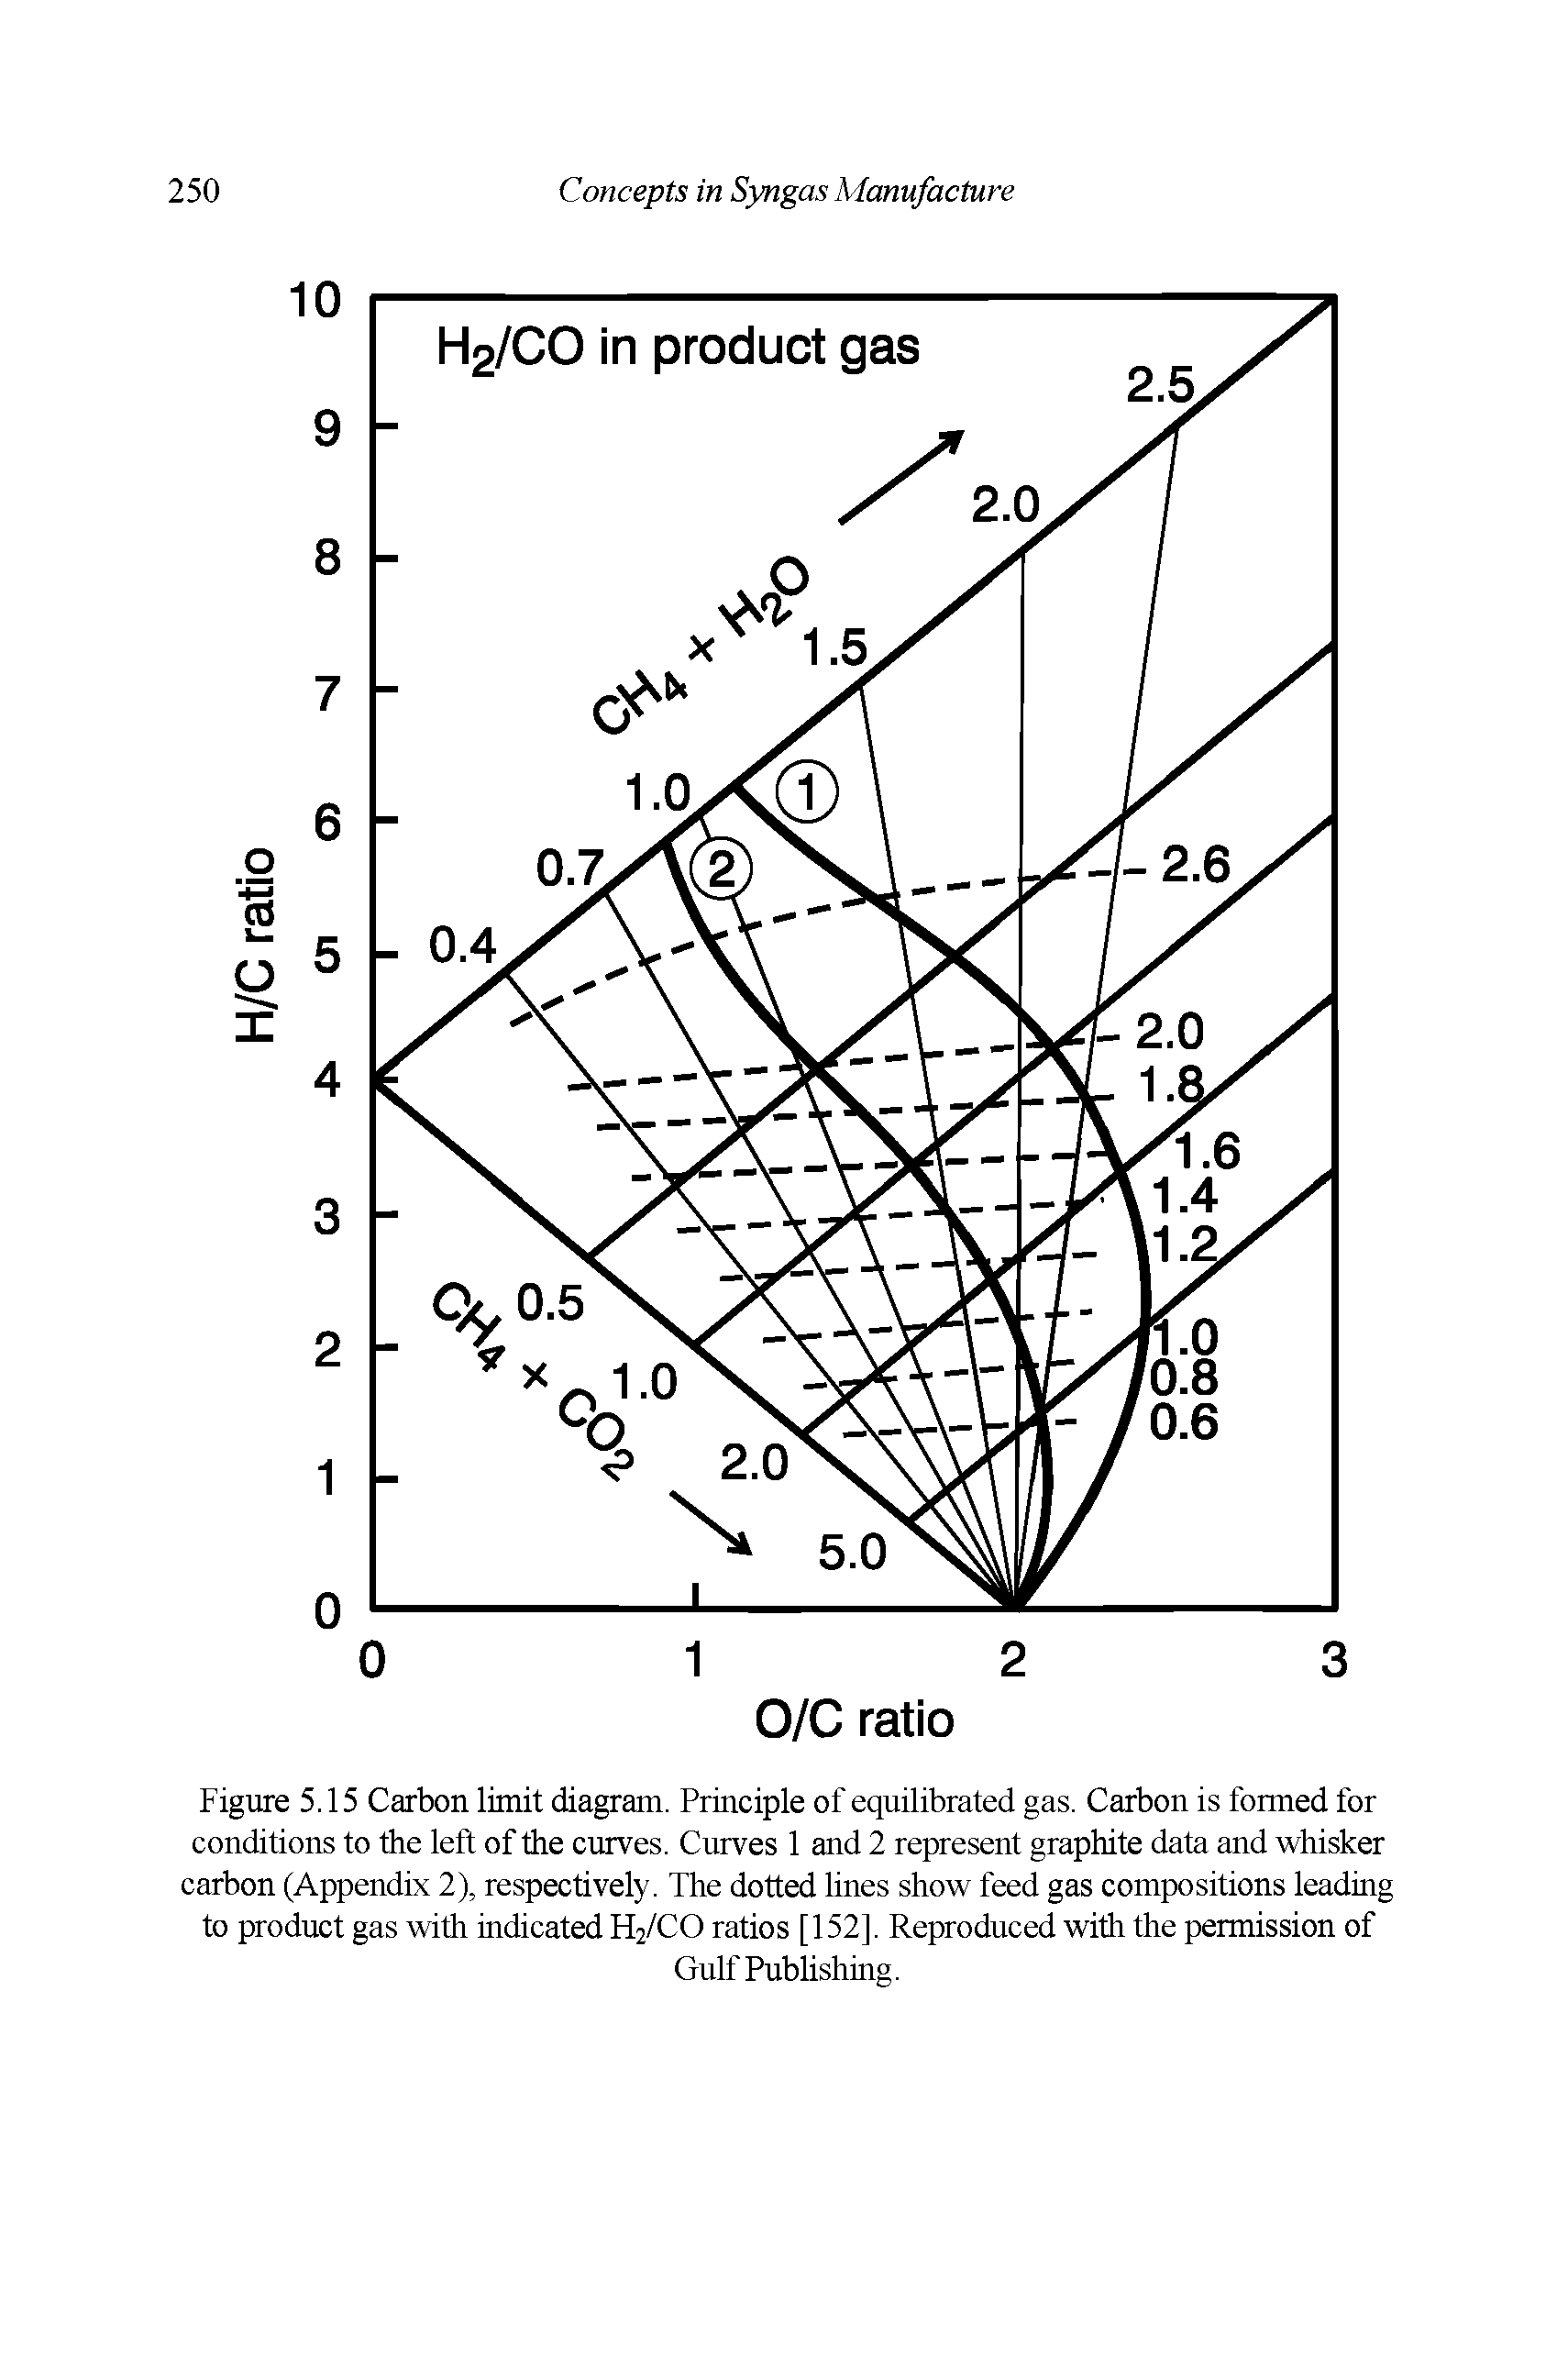 Figure 5.15 Carbon limit diagram. Principle of equilibrated gas. Carbon is formed for conditions to the left of the curves. Curves 1 and 2 represent graphite data and whisker carbon (Appendix 2), respectively. The dotted hnes show feed gas compositions leading to product gas with indicated H2/CO ratios [152]. Reproduced with the permission of...